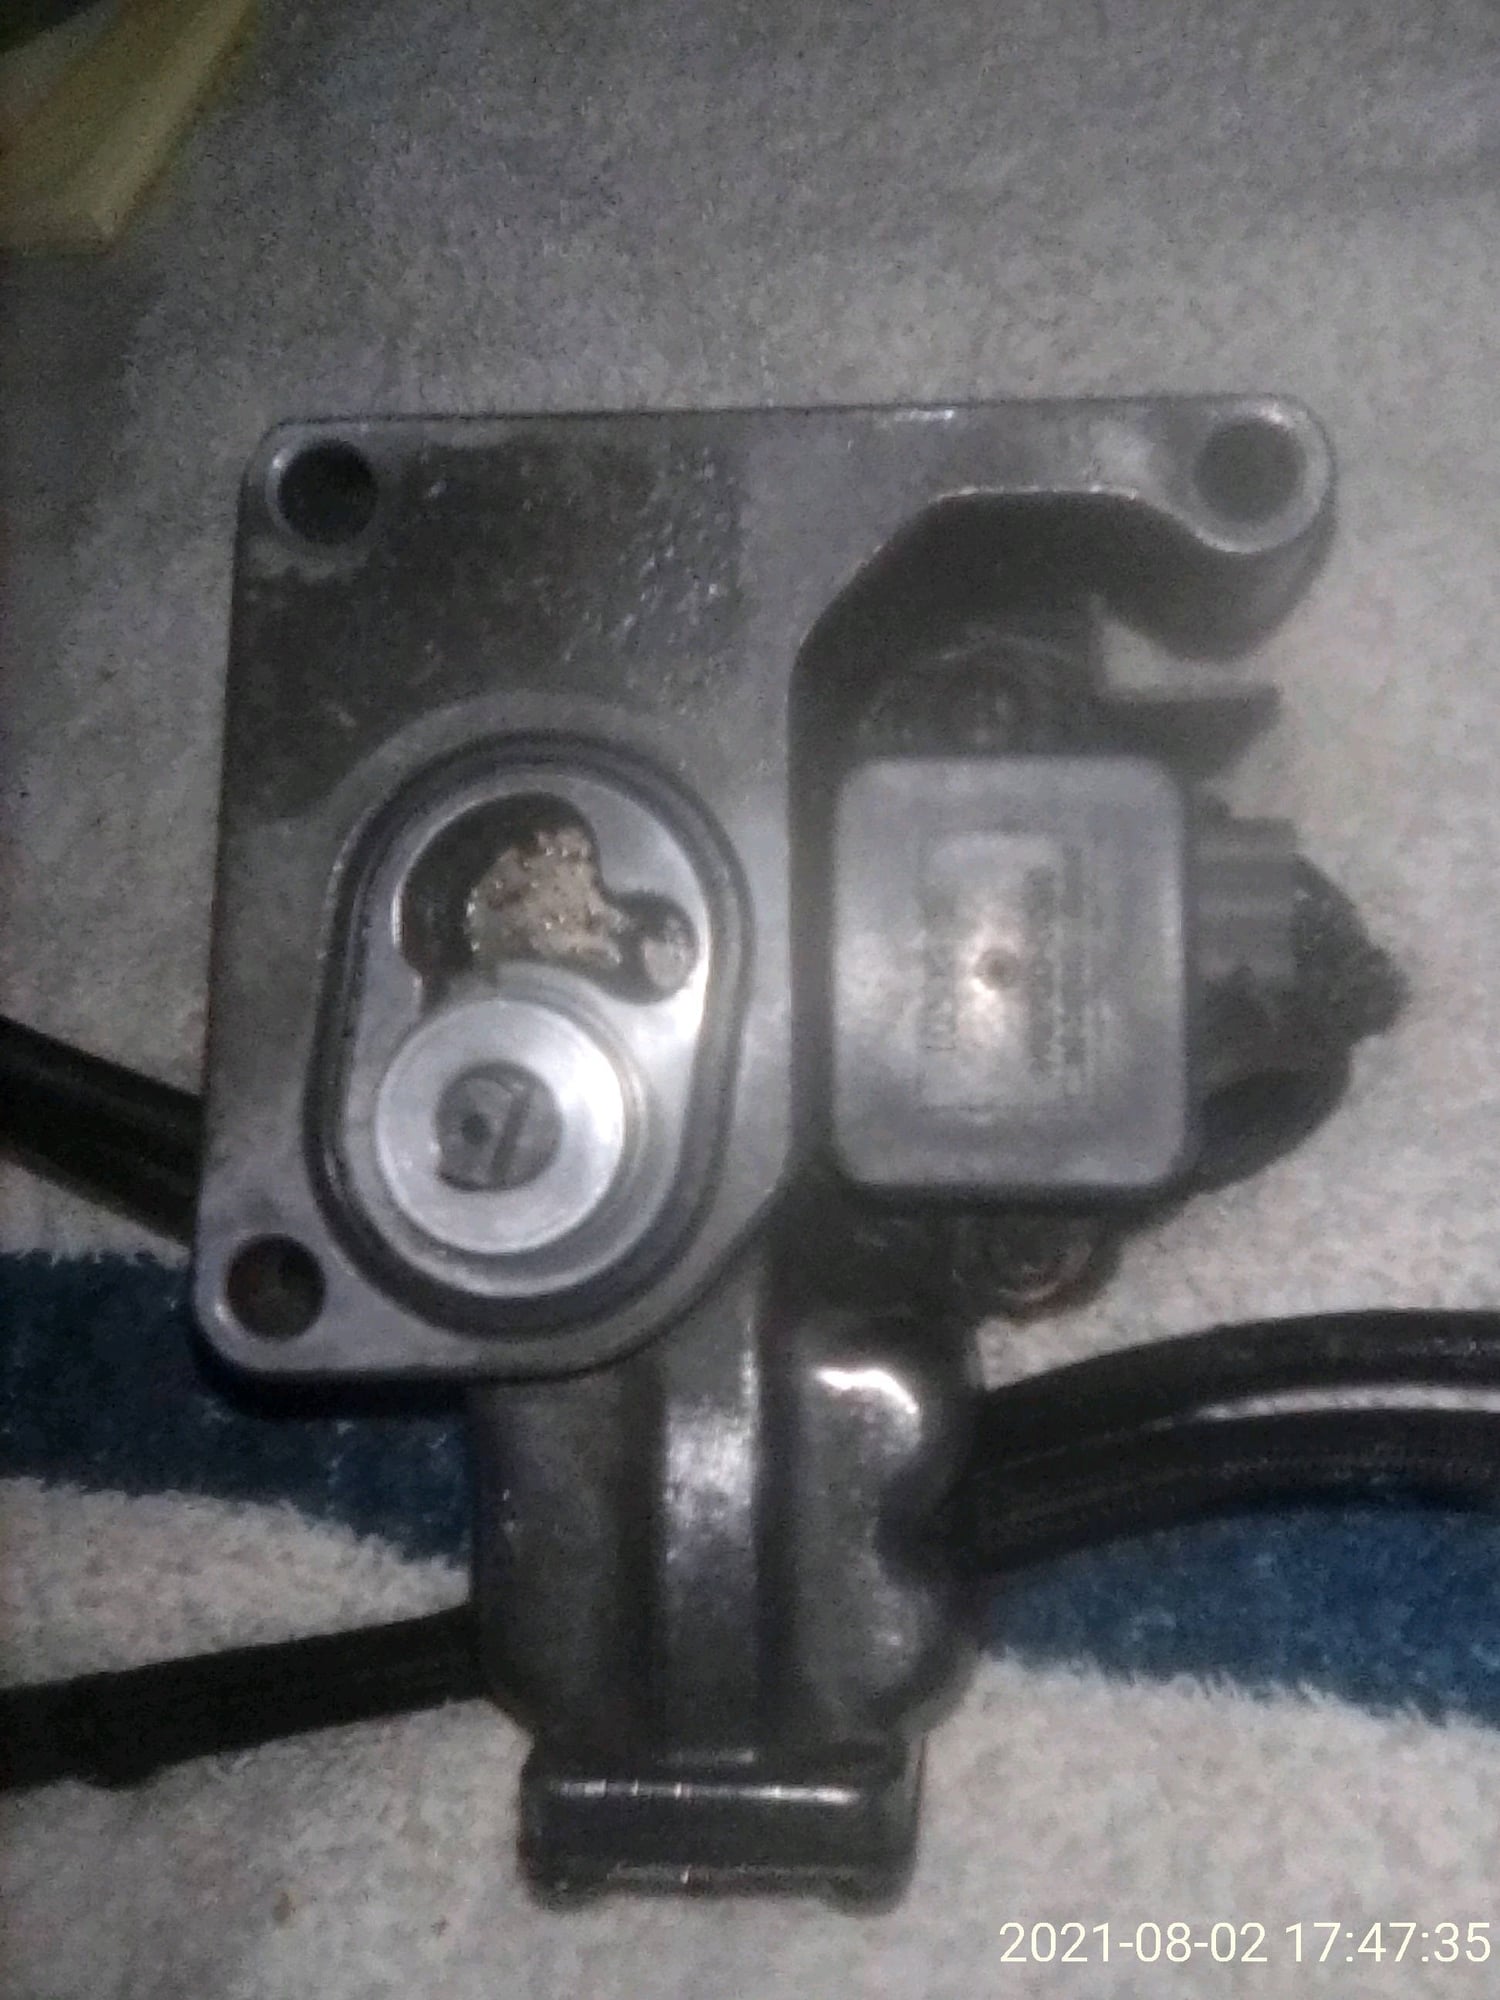 Miscellaneous - FD - OEM Oil Metering Pump - Used - 1993 to 1995 Mazda RX-7 - San Jose, CA 95121, United States